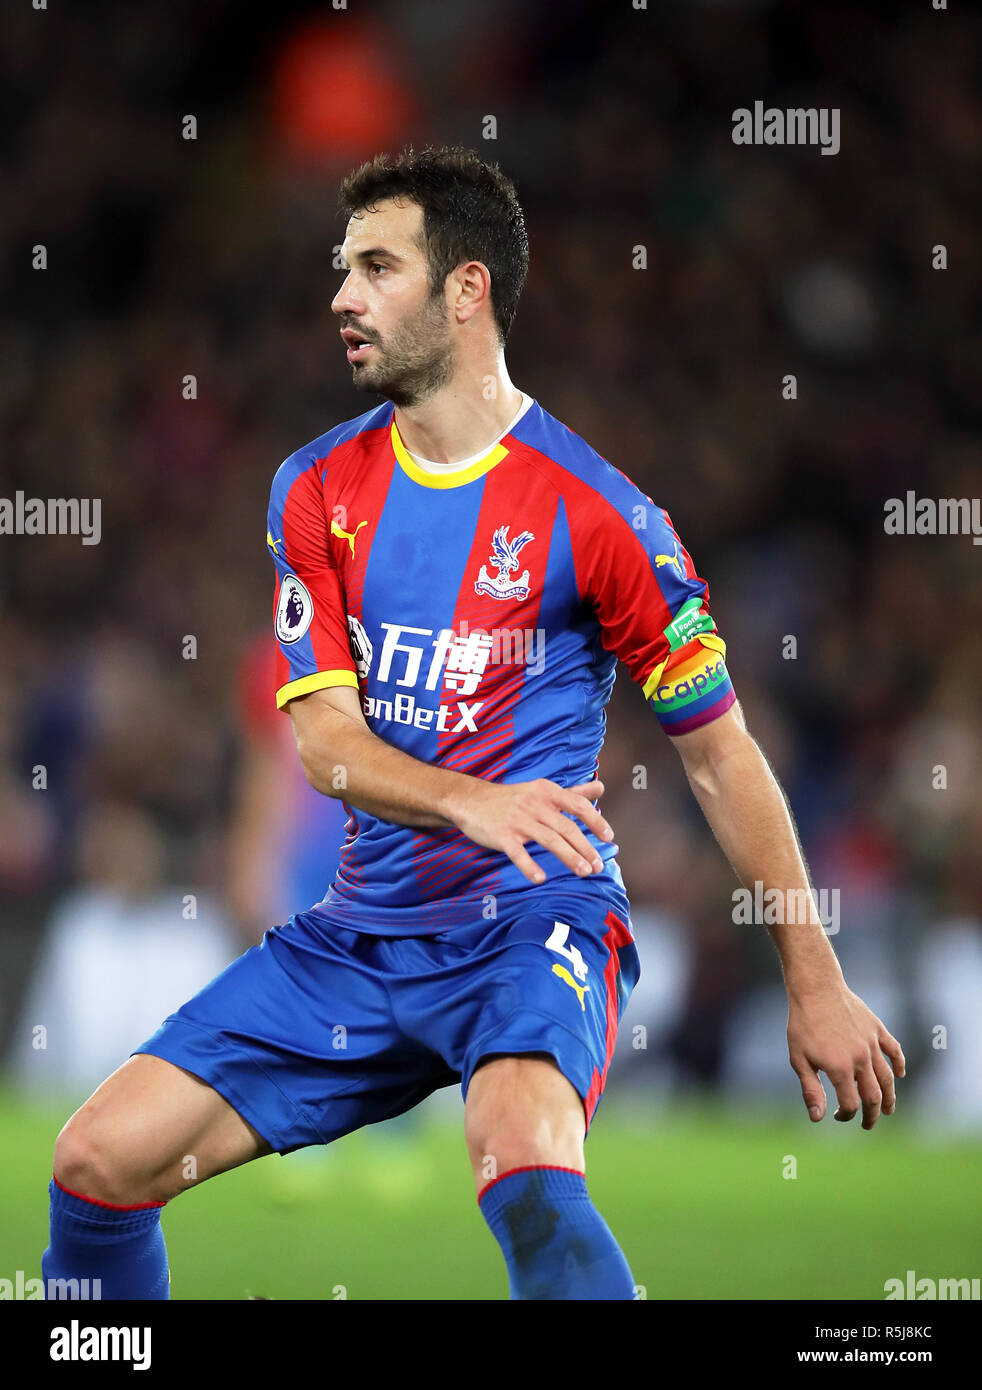 Crystal Palace's Luka Milivojevic with the rainbow captain's armband during the Premier League match at Selhurst Park, London. Stock Photo